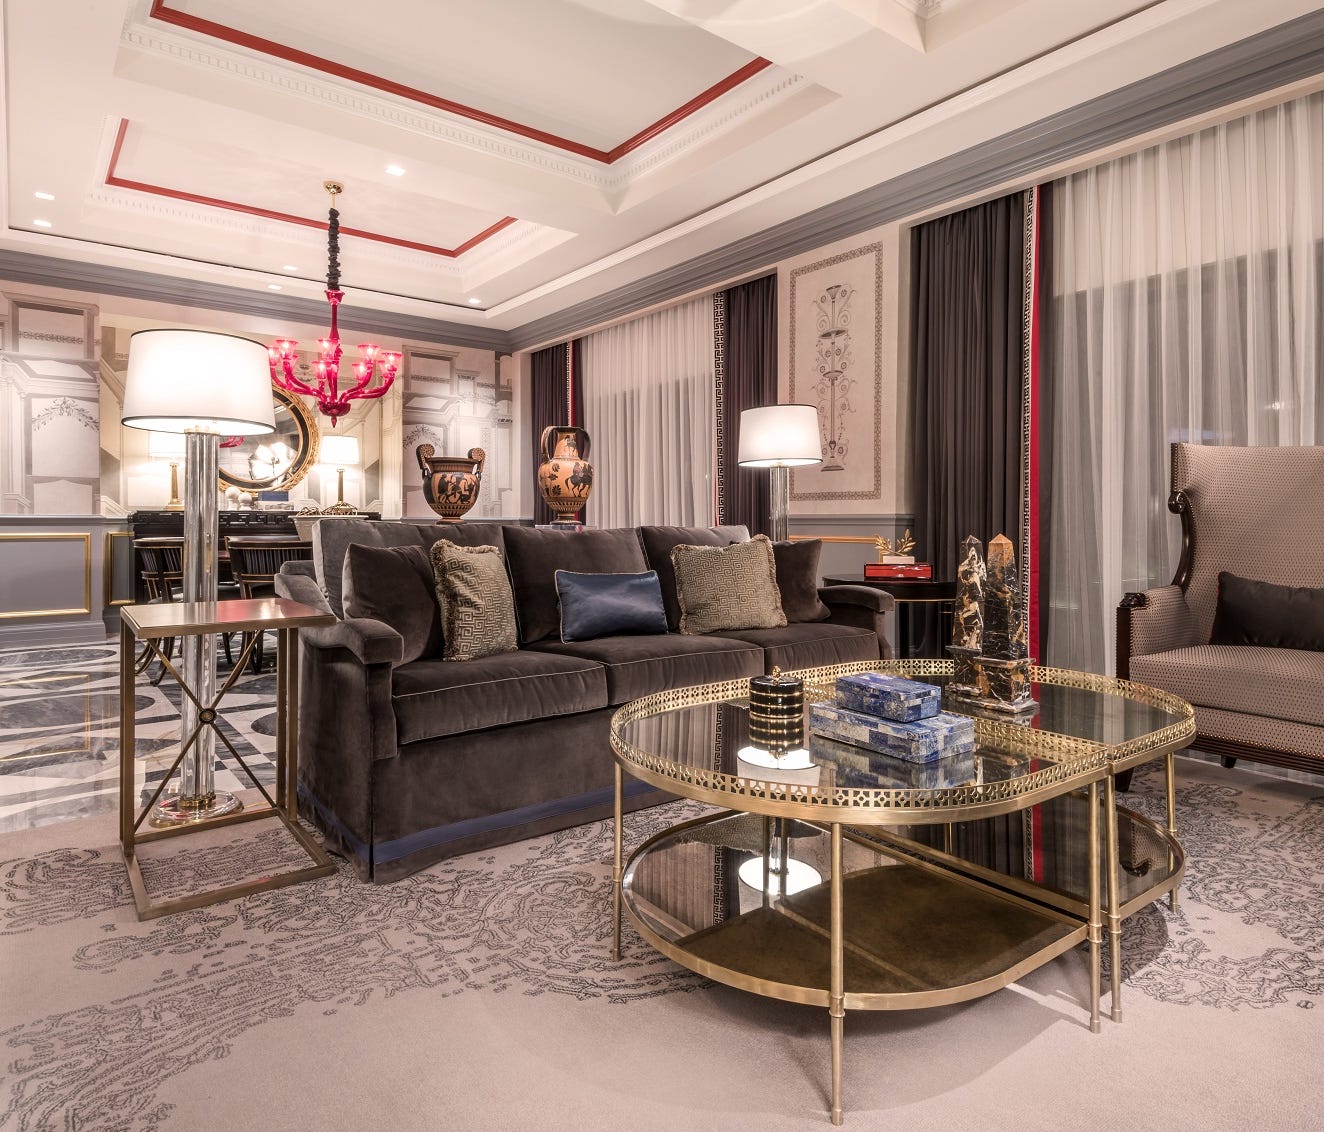 The 29th floor at the Palace Tower at Caesars Palace in Las Vegas features 10 new villas. with $1 million worth of bespoke furnishings.